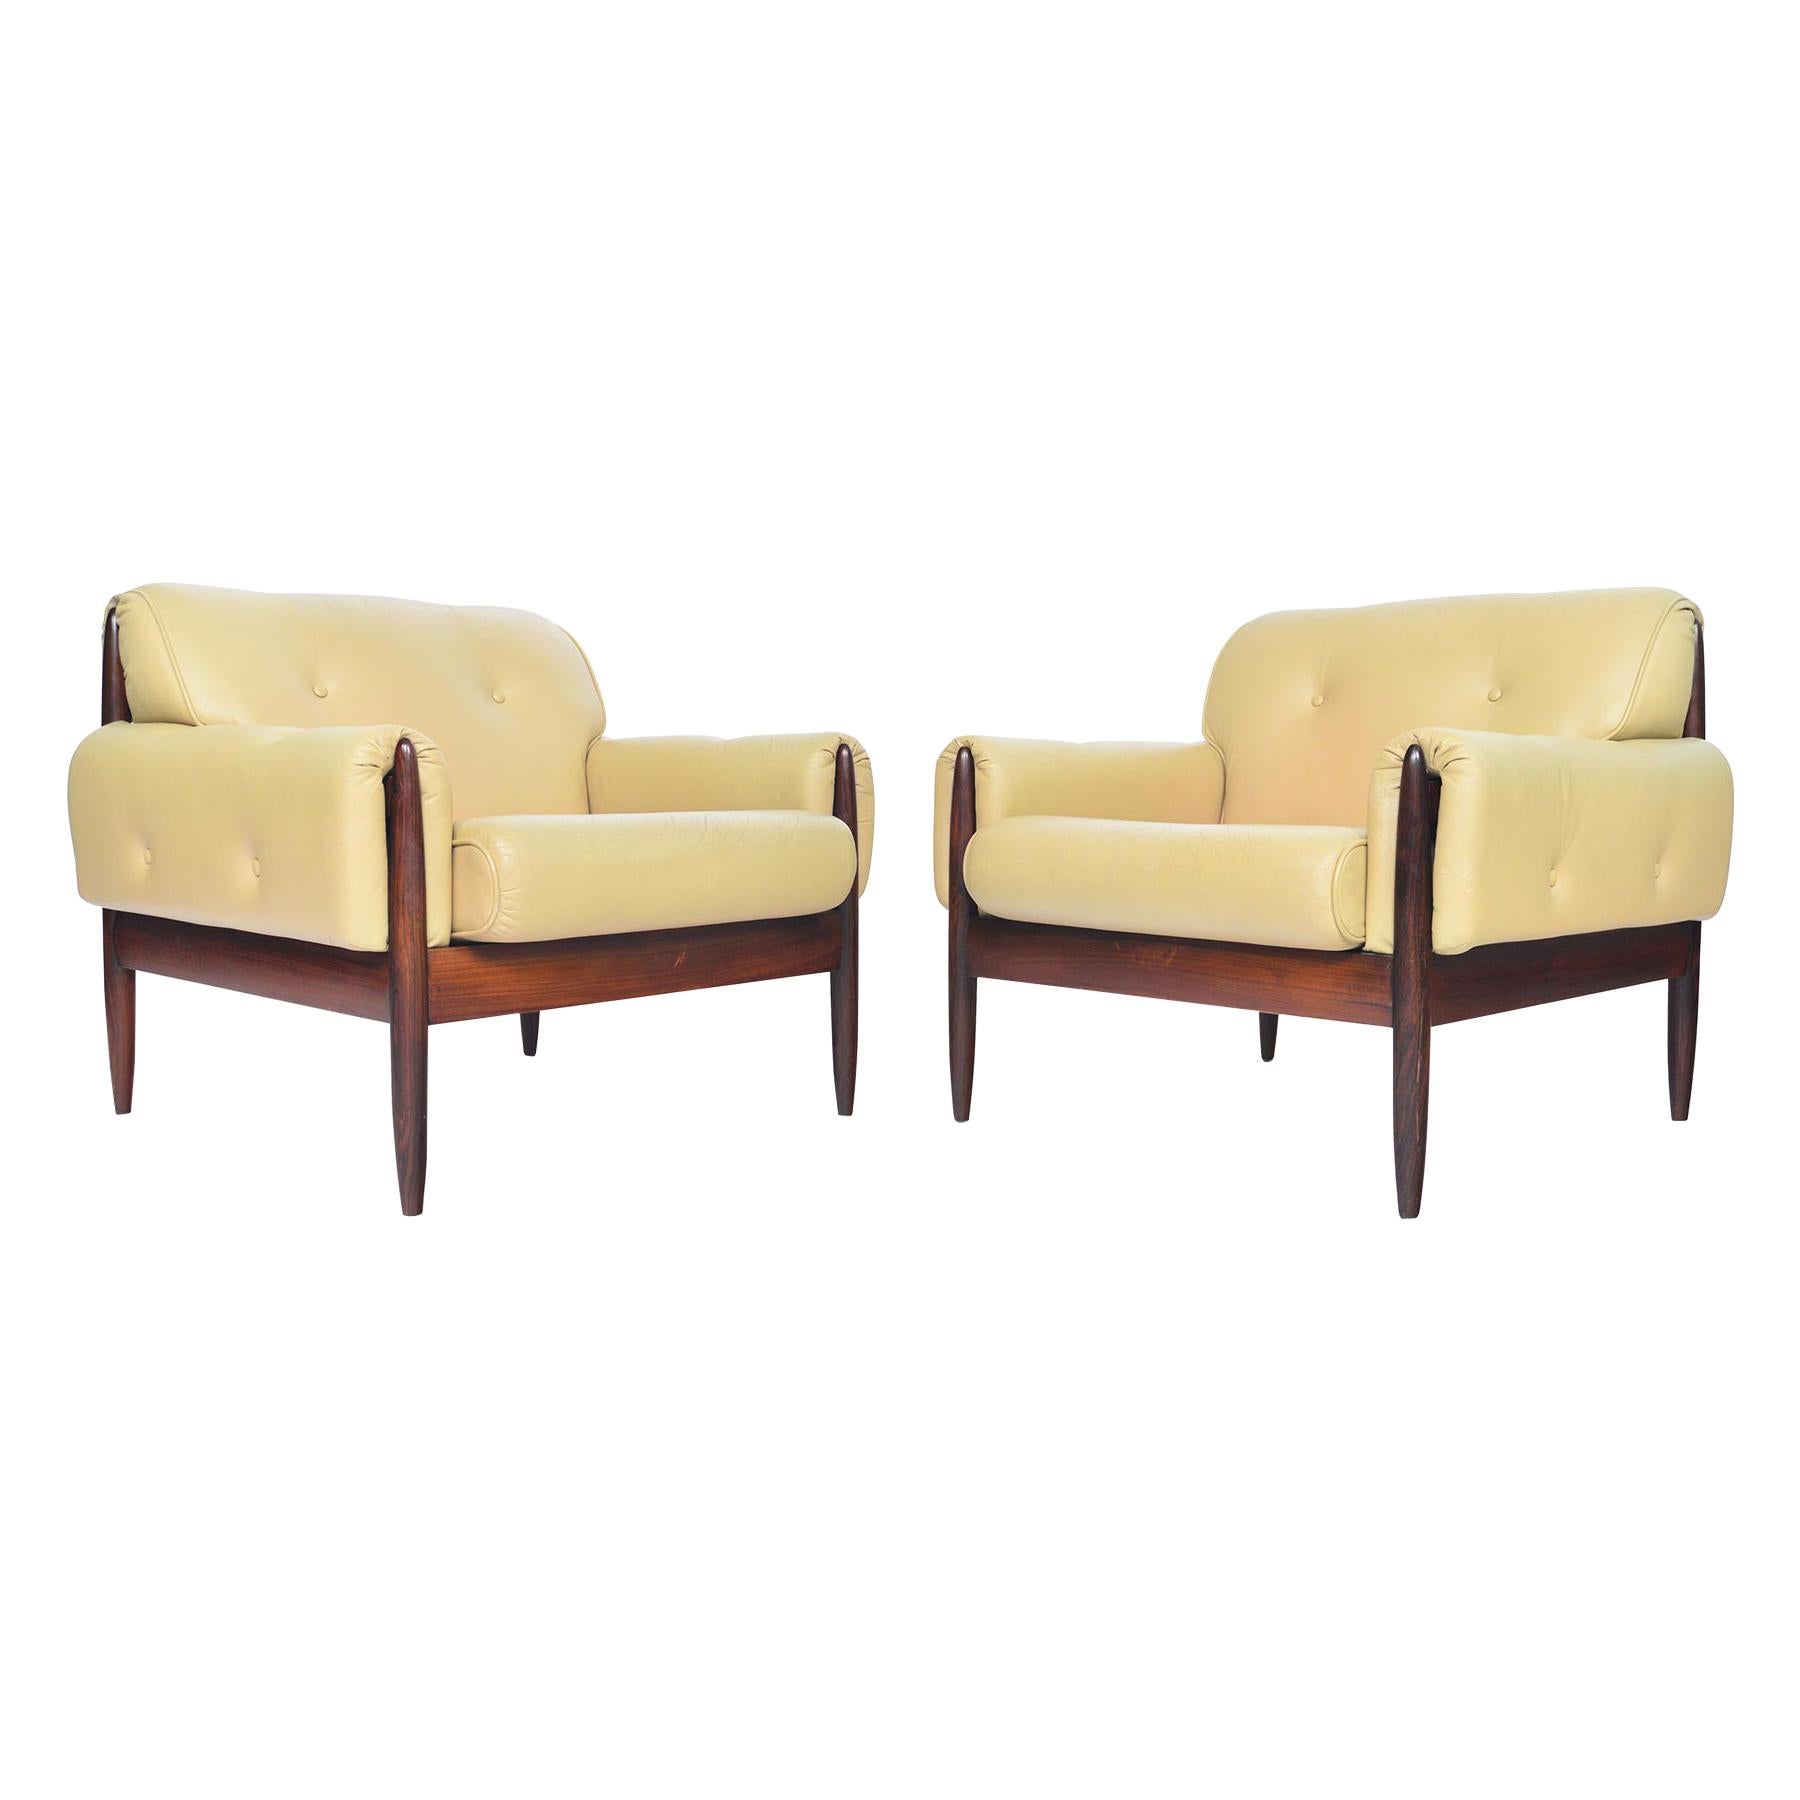 Pair of Danish Modern Rosewood and Leather Lounge Chairs